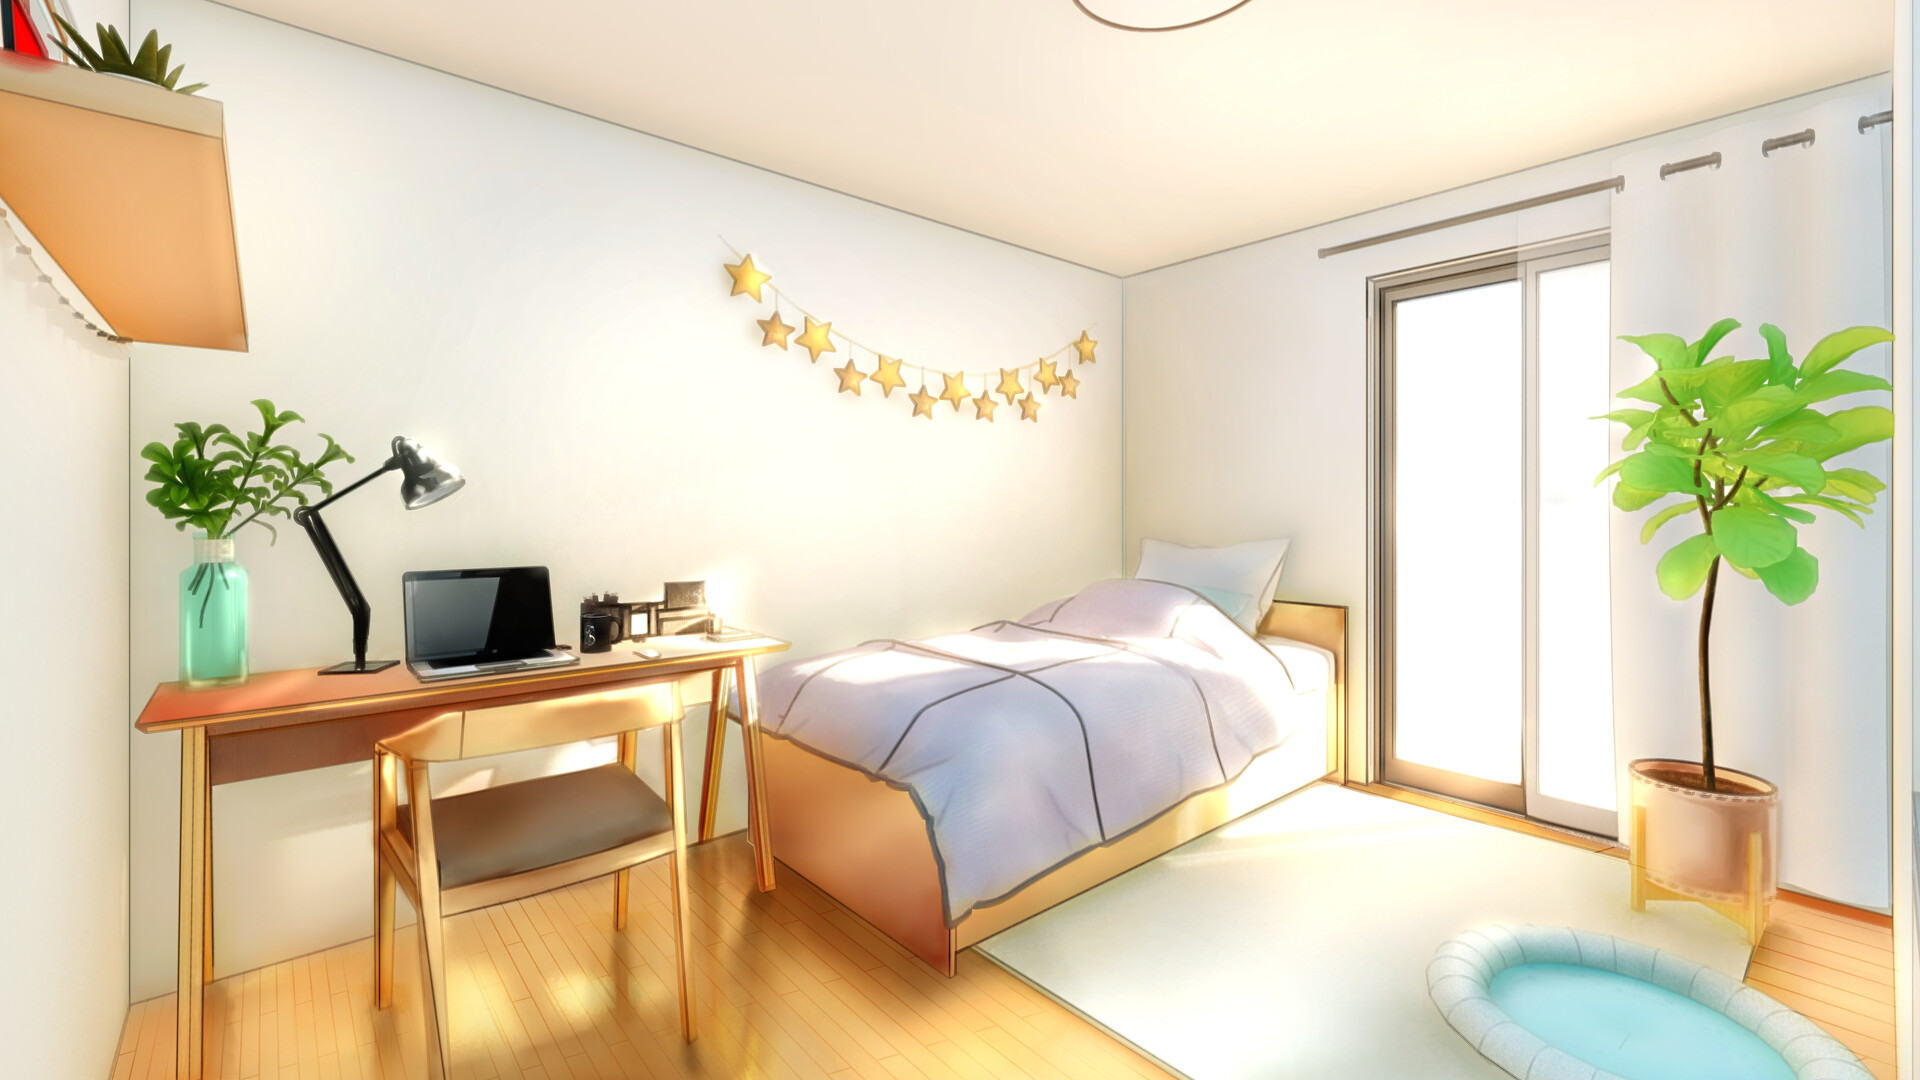 Lexica  the background image depicts a cozy bedroom at night